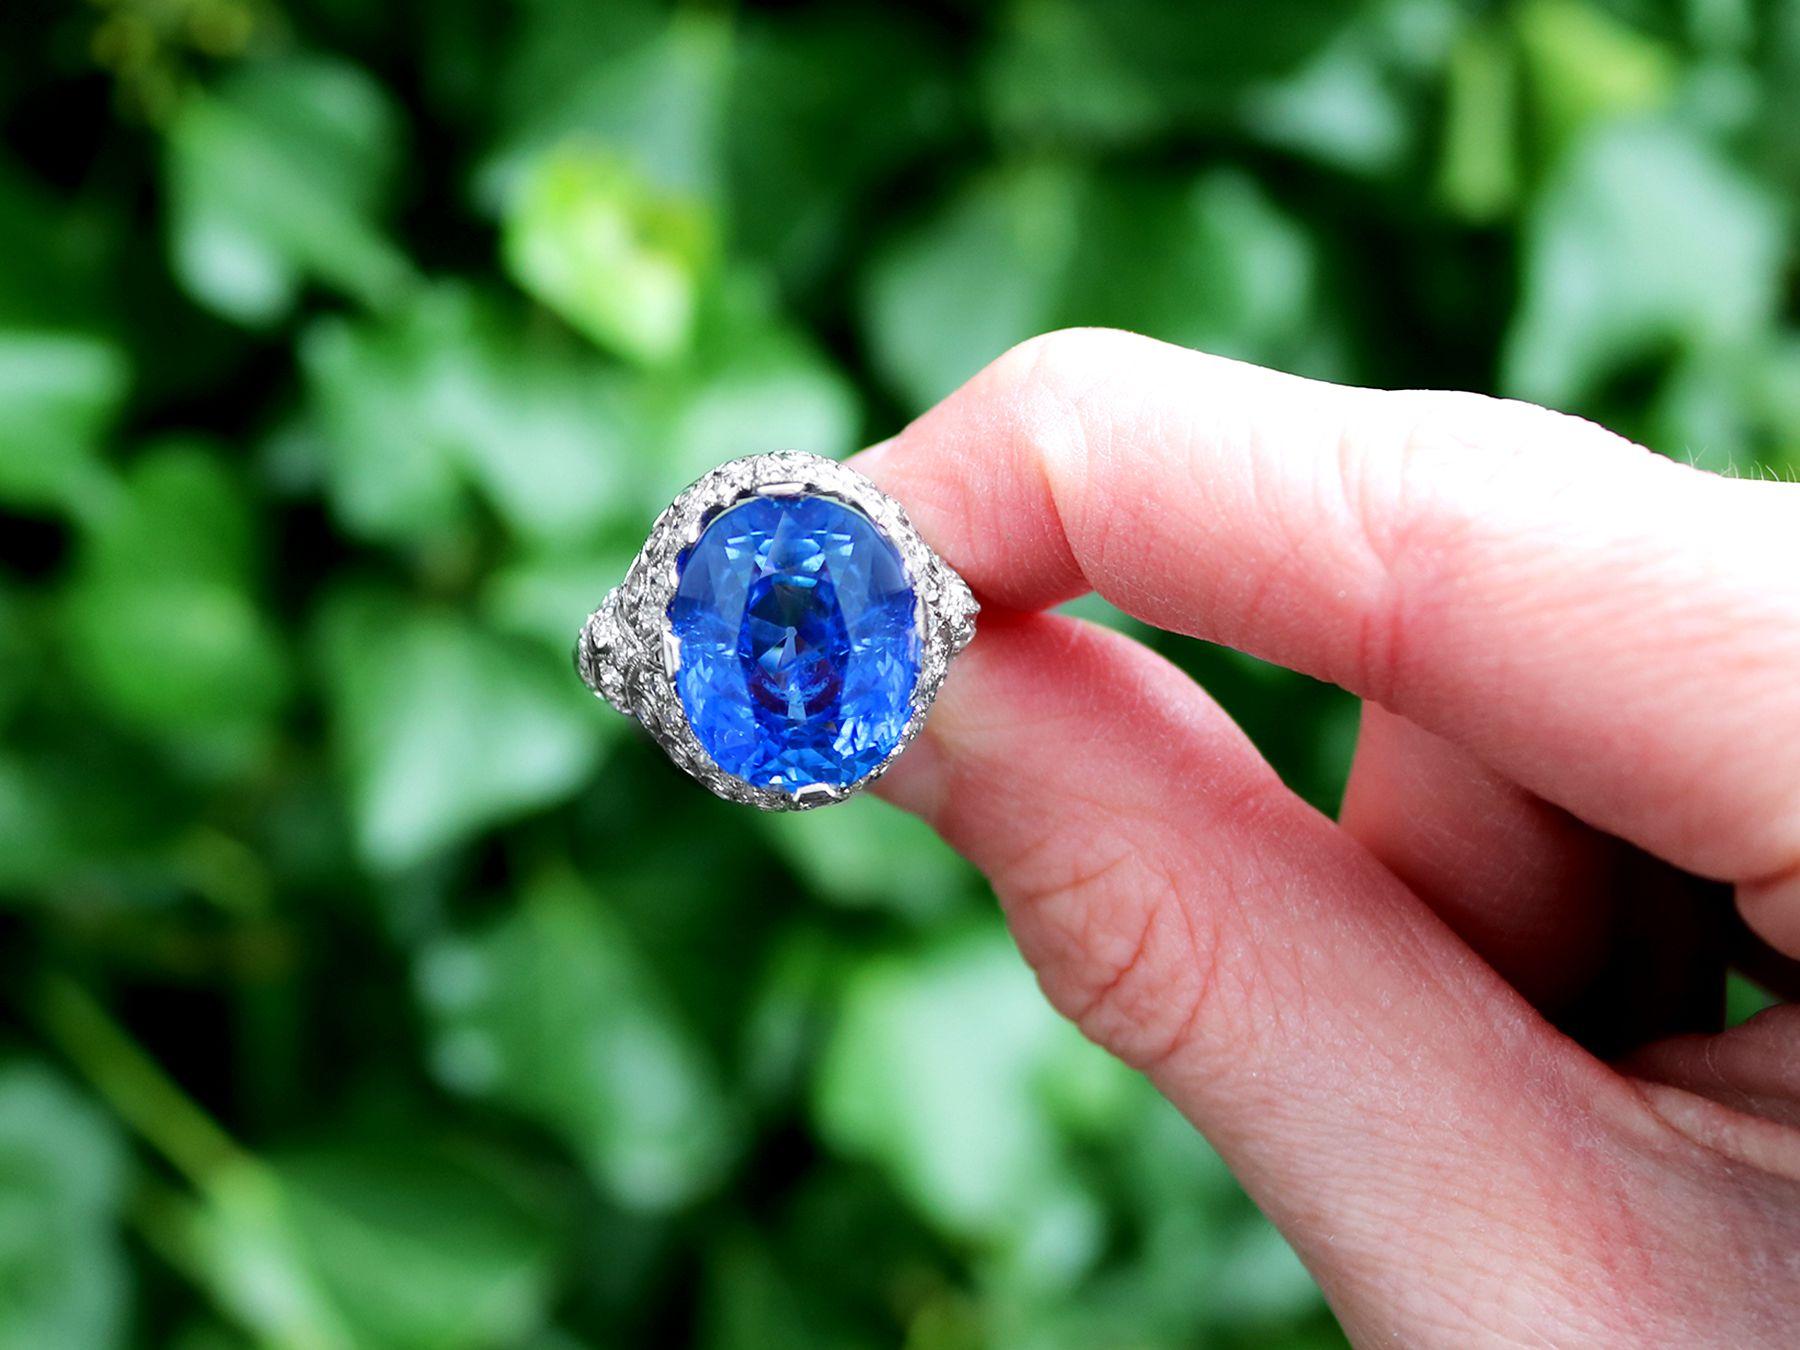 A stunning, fine and impressive antique 16.31 Ceylon sapphire, 0.95 carat diamond and platinum cocktail ring; part of our diverse antique jewellery and estate jewelry collections.

This stunning, fine and impressive sapphire and diamond ring has